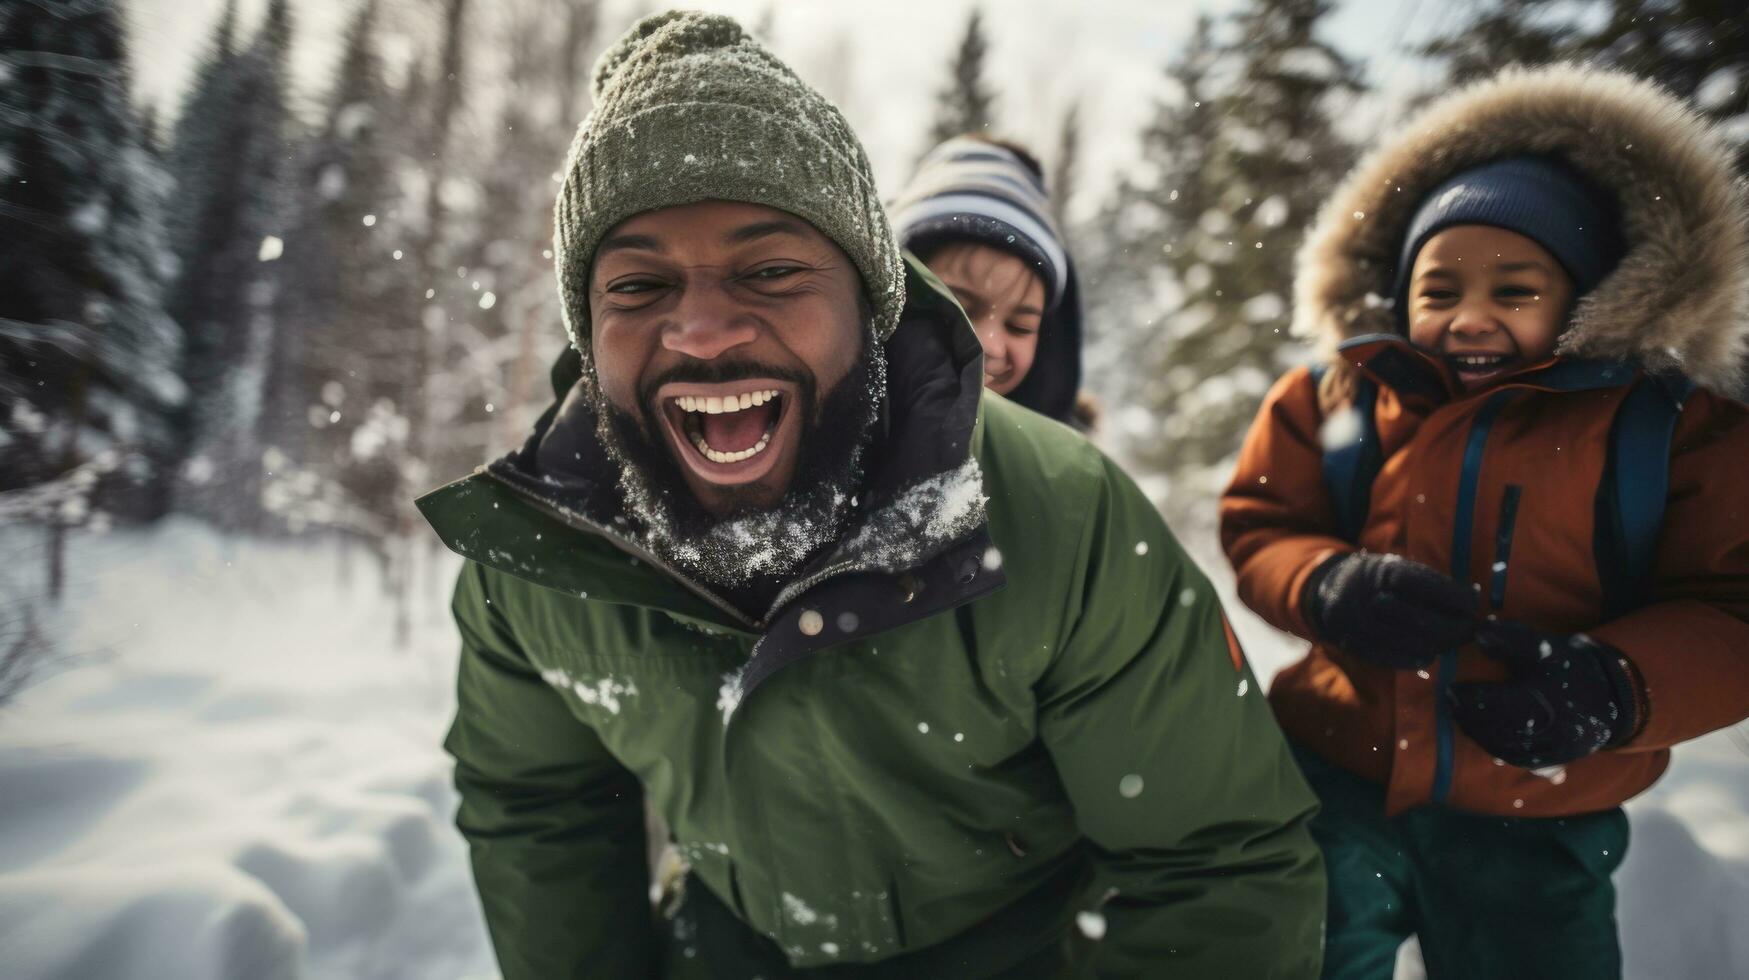 Kids and parents laughing during snowball fight in the forest photo